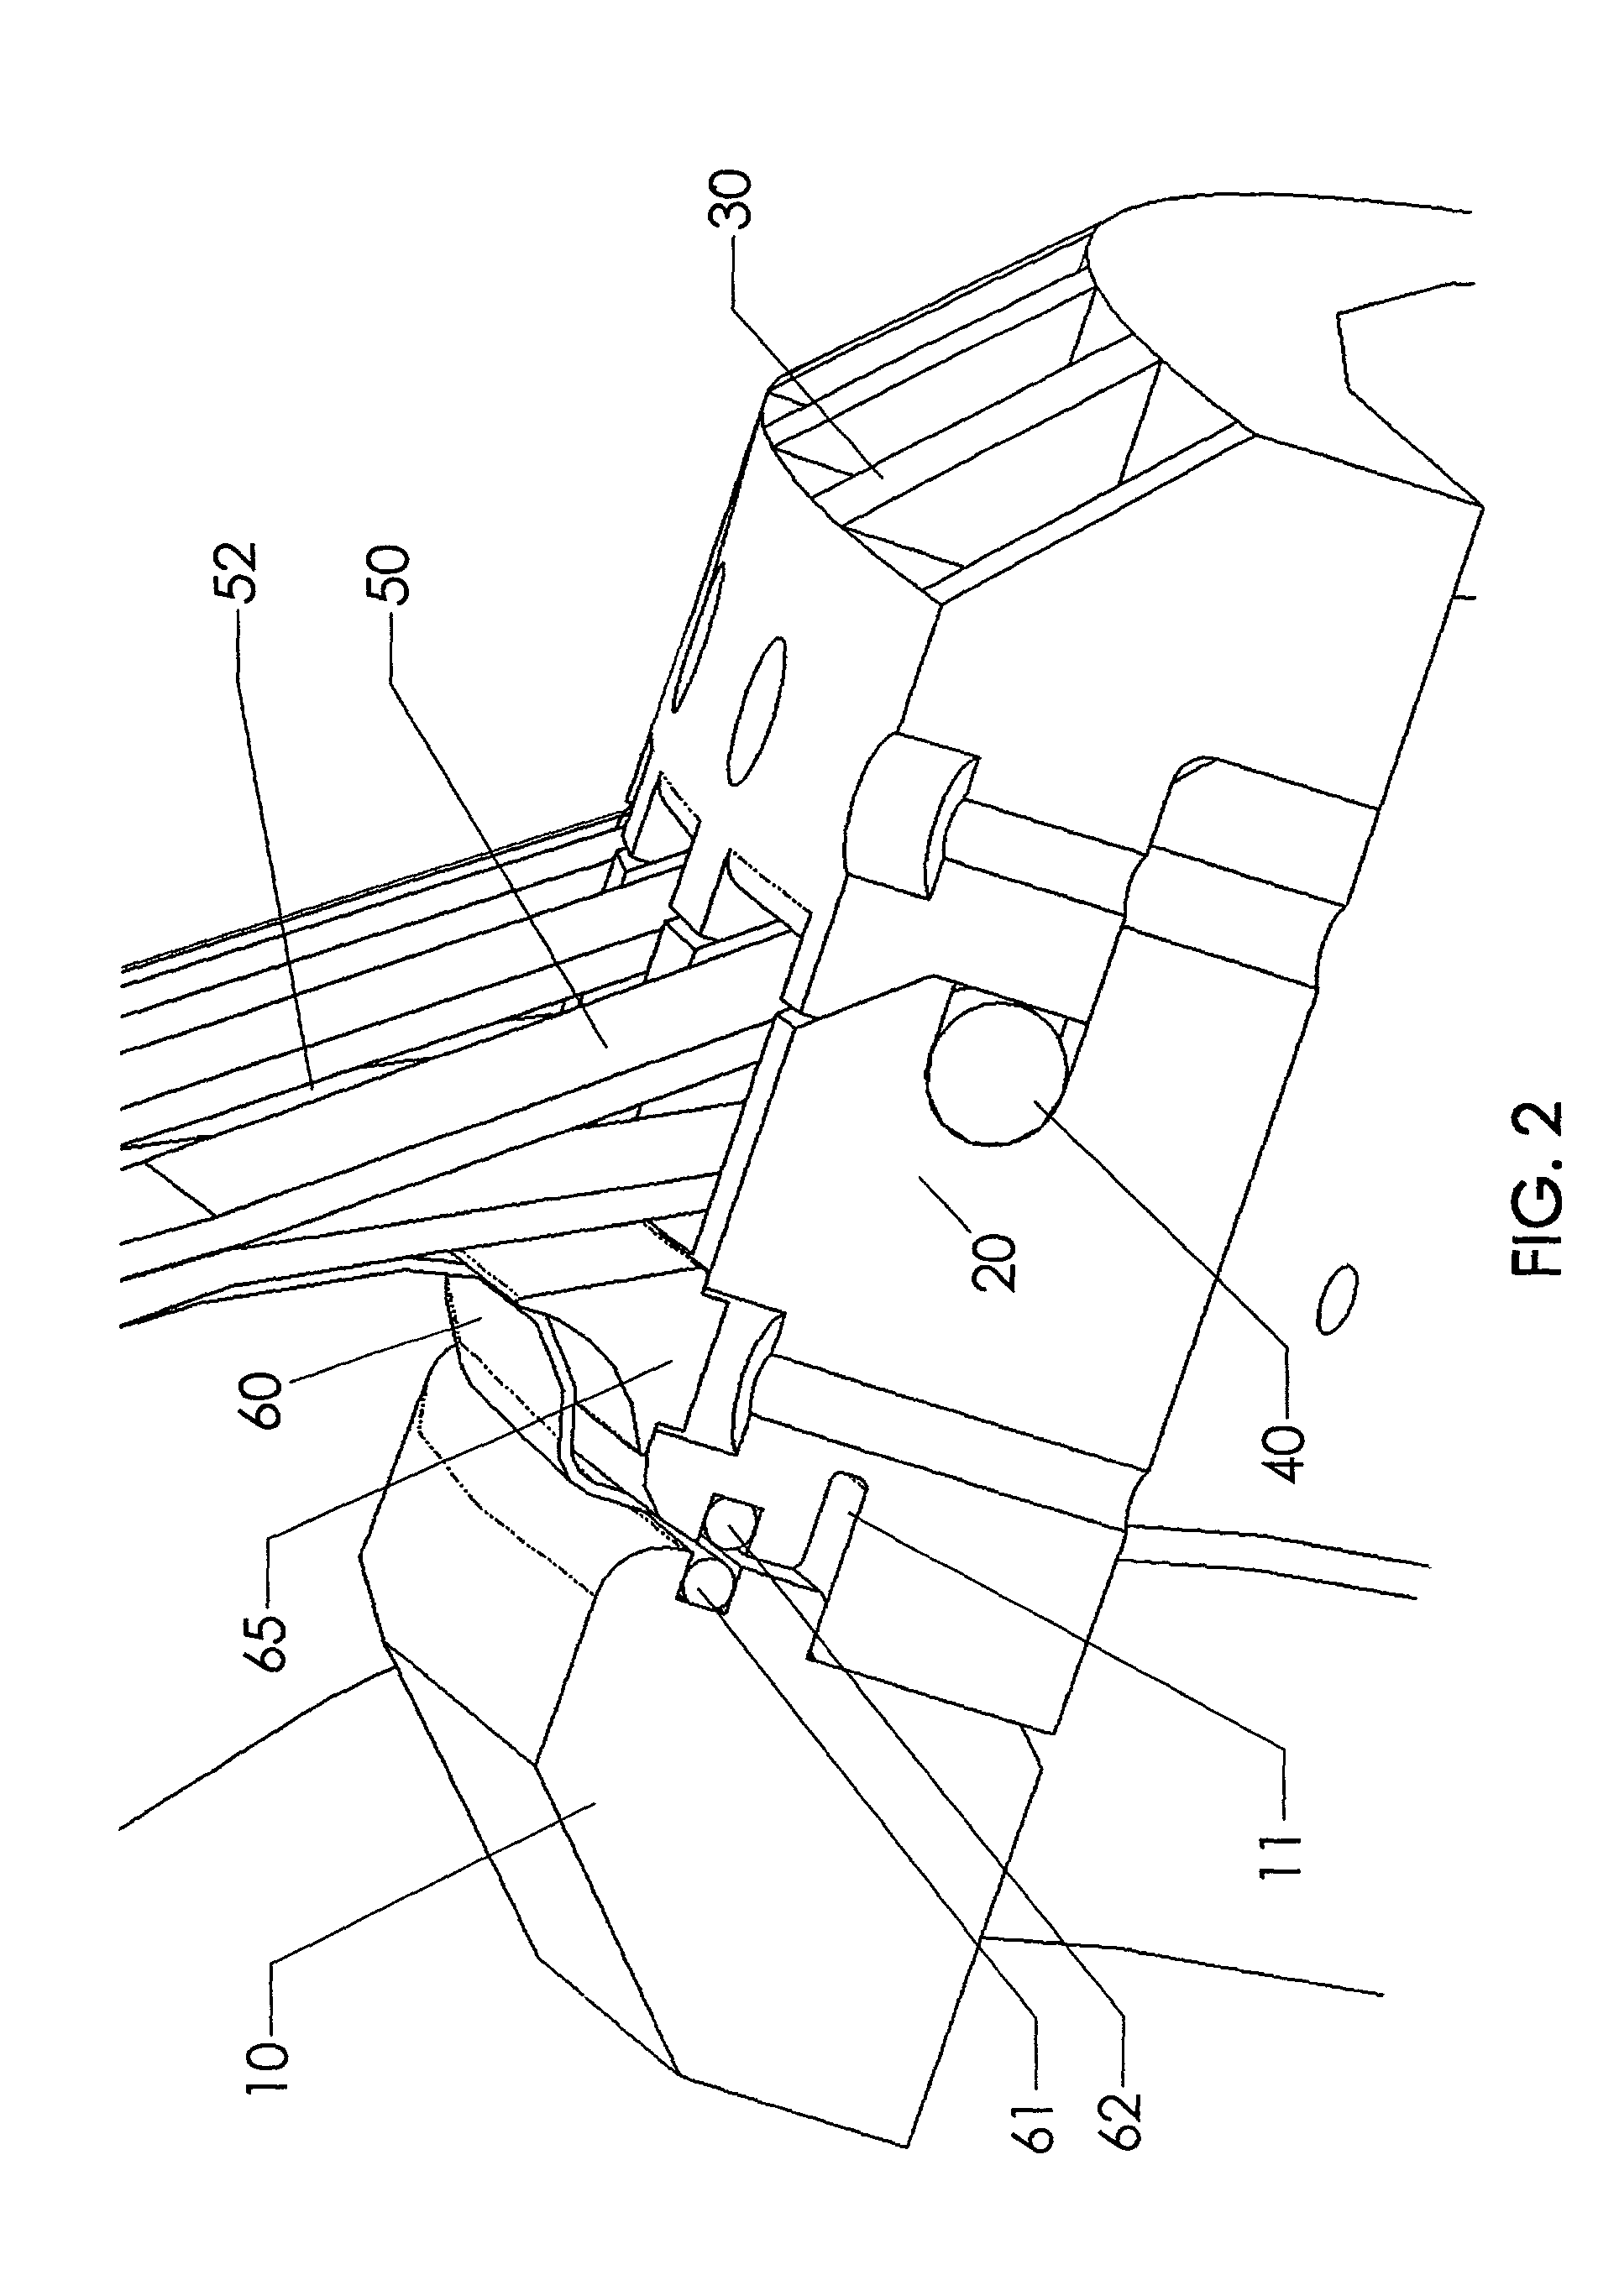 Apparatus for sealing and restraining the flexible pressure boundary of an inflatable spacecraft